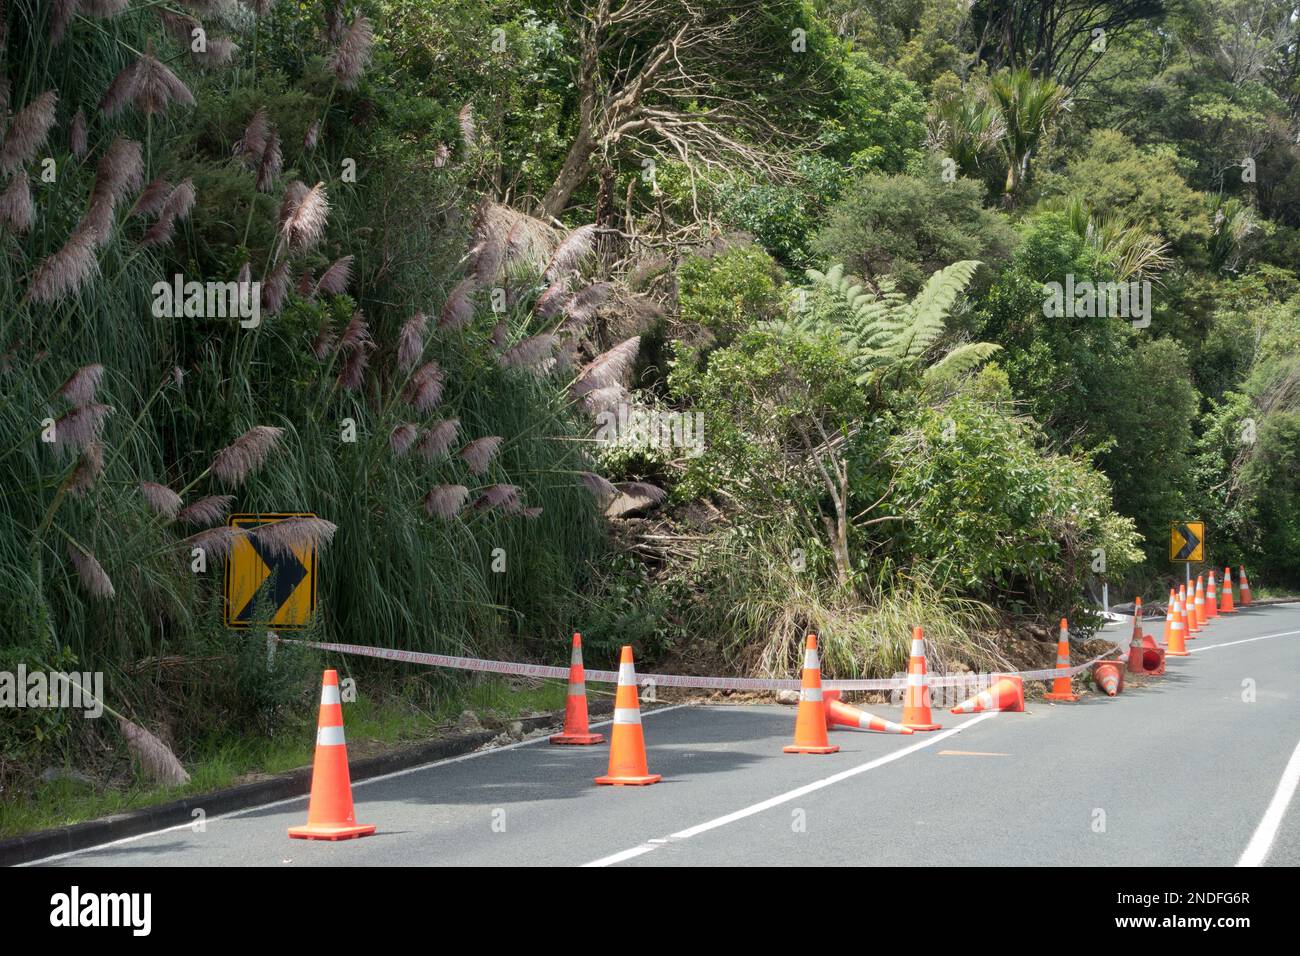 Following tropical storm Cyclone Gabrielle a land slip has occurred blocking one half a road.Orange safety cones are in place around the fallen tree Stock Photo